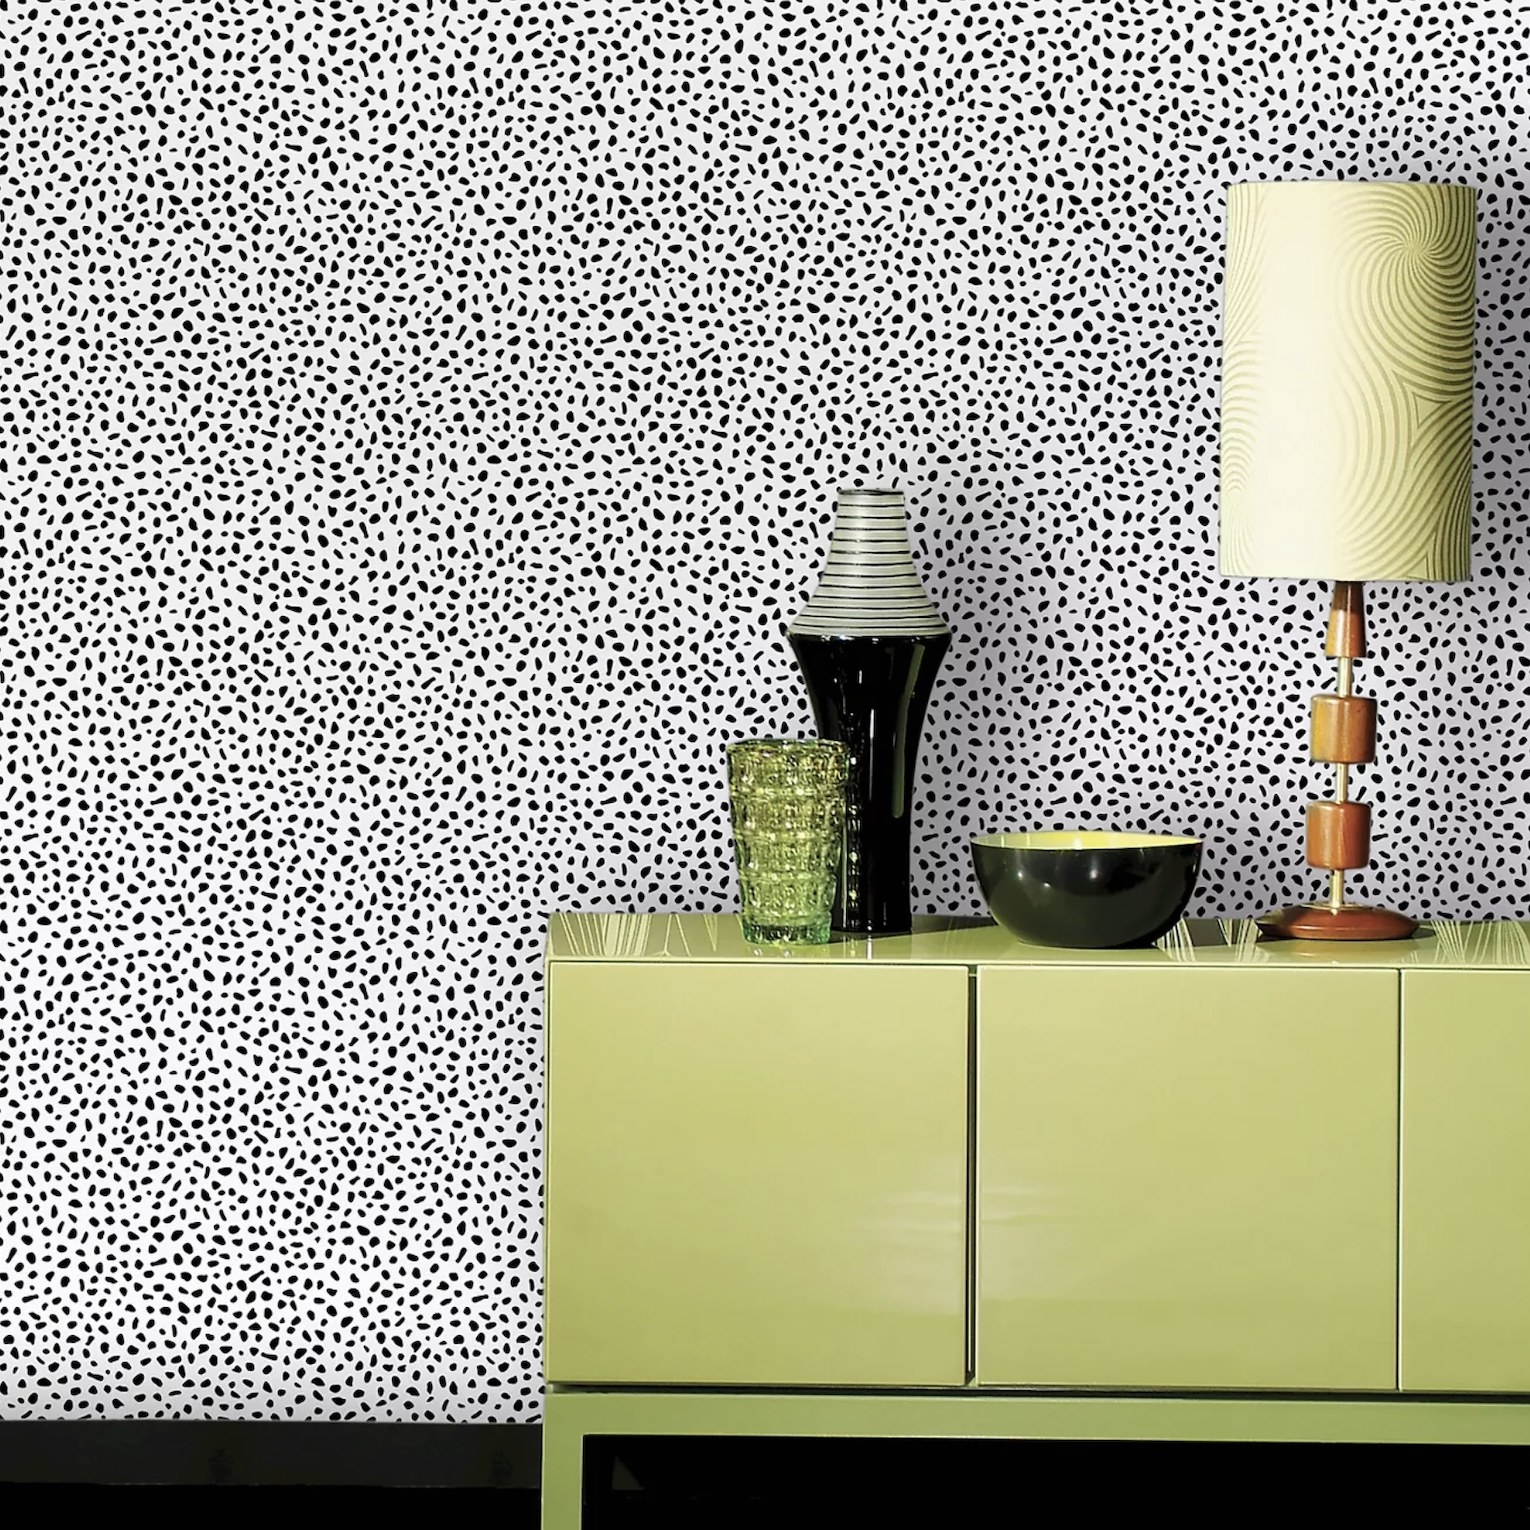 The black and white speckled wallpaper